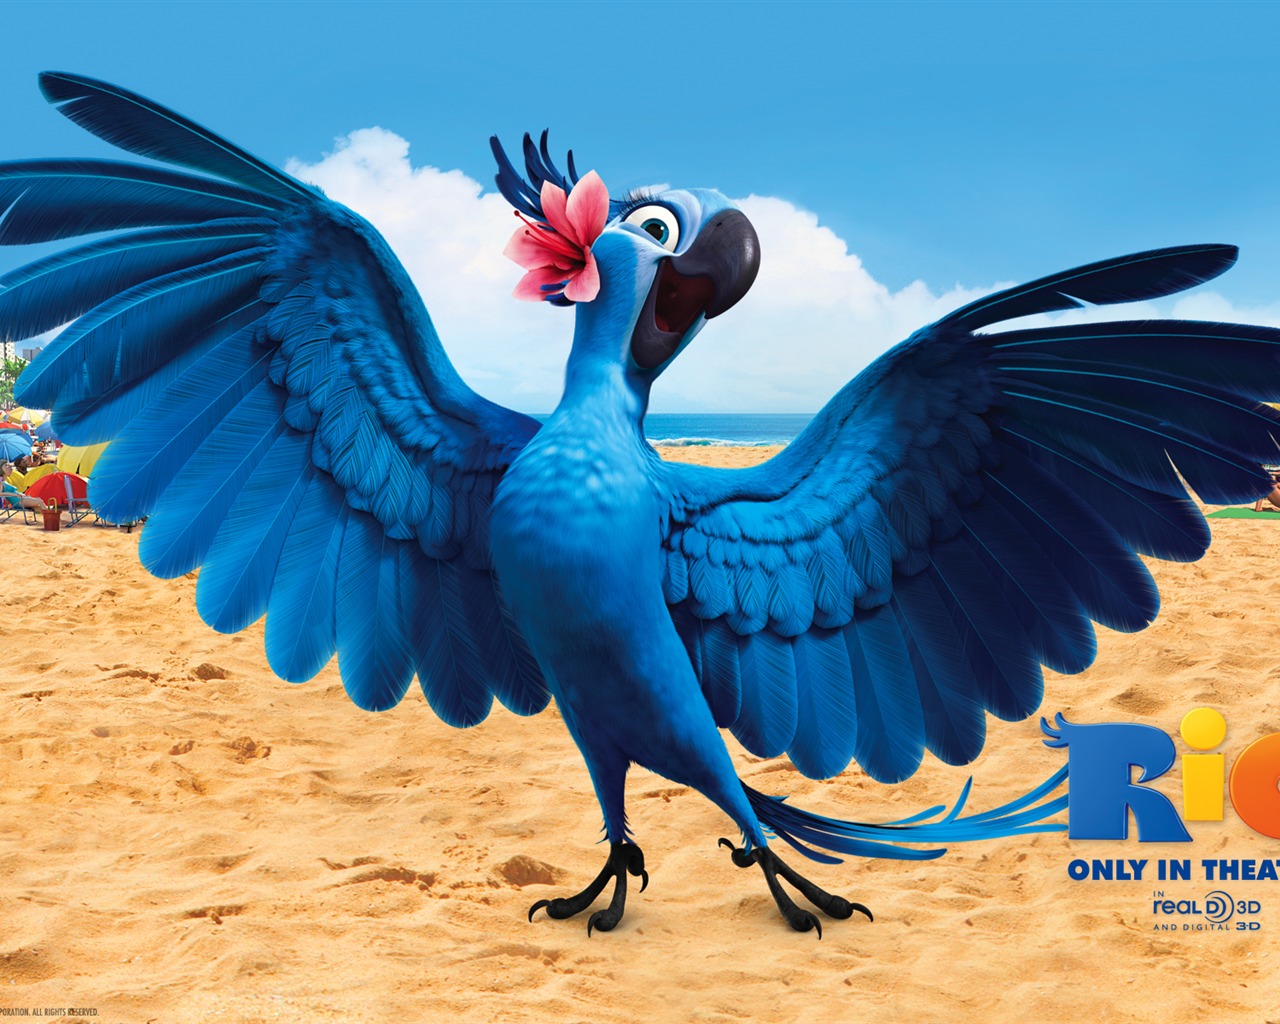 Rio 2011 wallpapers #1 - 1280x1024